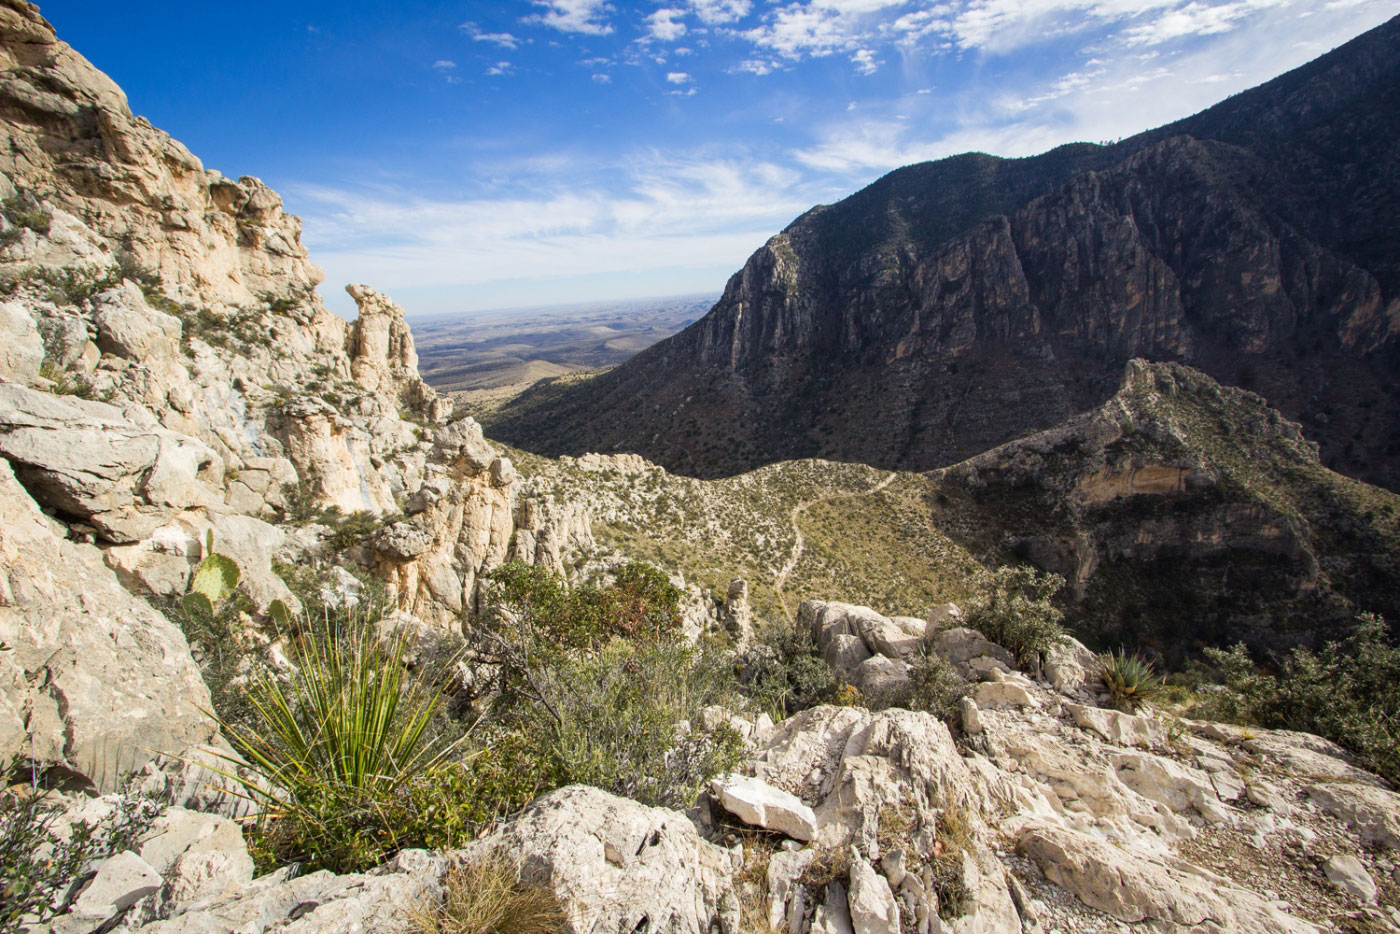 Hike Hunter Peak and The Bowl via Bear Canyon Loop in Guadalupe Mountains National Park, Texas - Stav is Lost